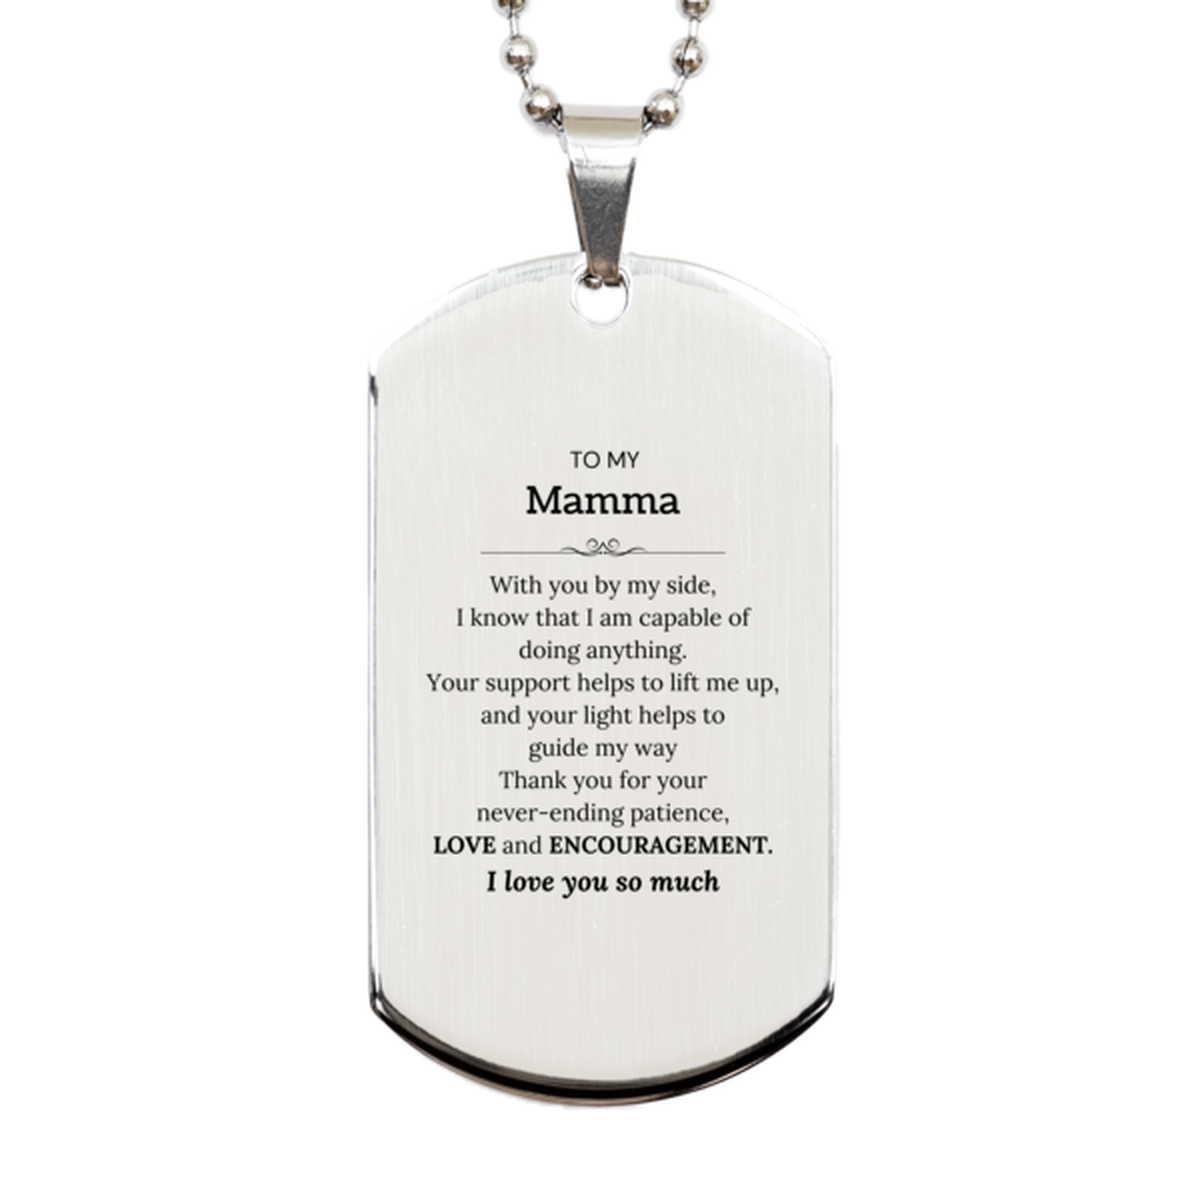 Appreciation Mamma Silver Dog Tag Gifts, To My Mamma Birthday Christmas Wedding Keepsake Gifts for Mamma With you by my side, I know that I am capable of doing anything. I love you so much